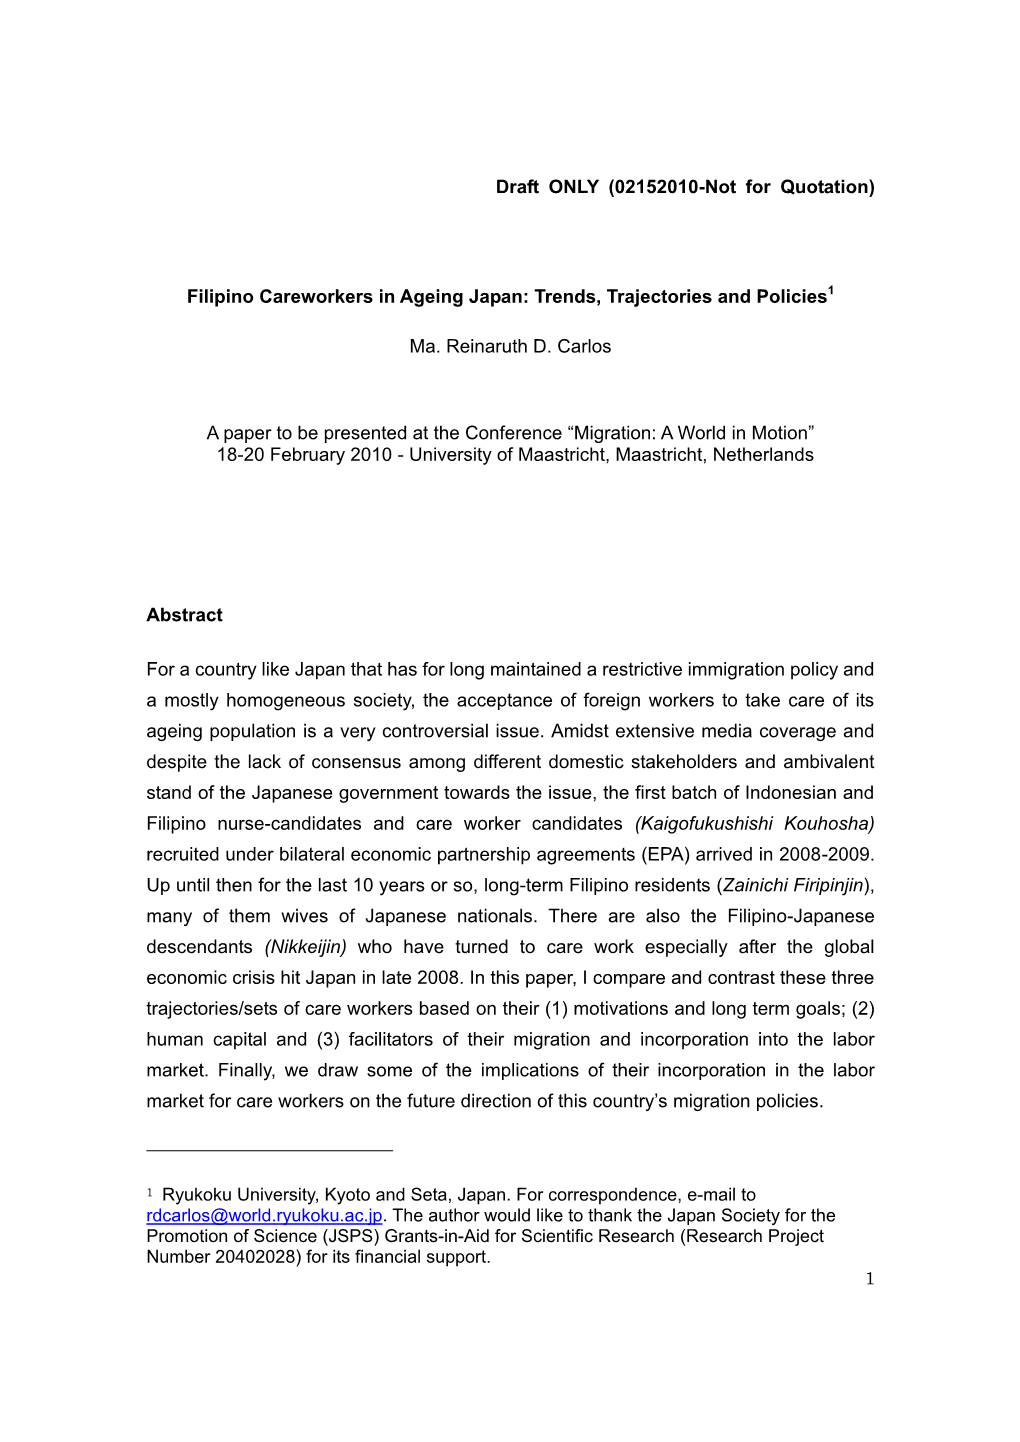 Filipino Careworkers in Ageing Japan: Trends, Trajectories and Policies1